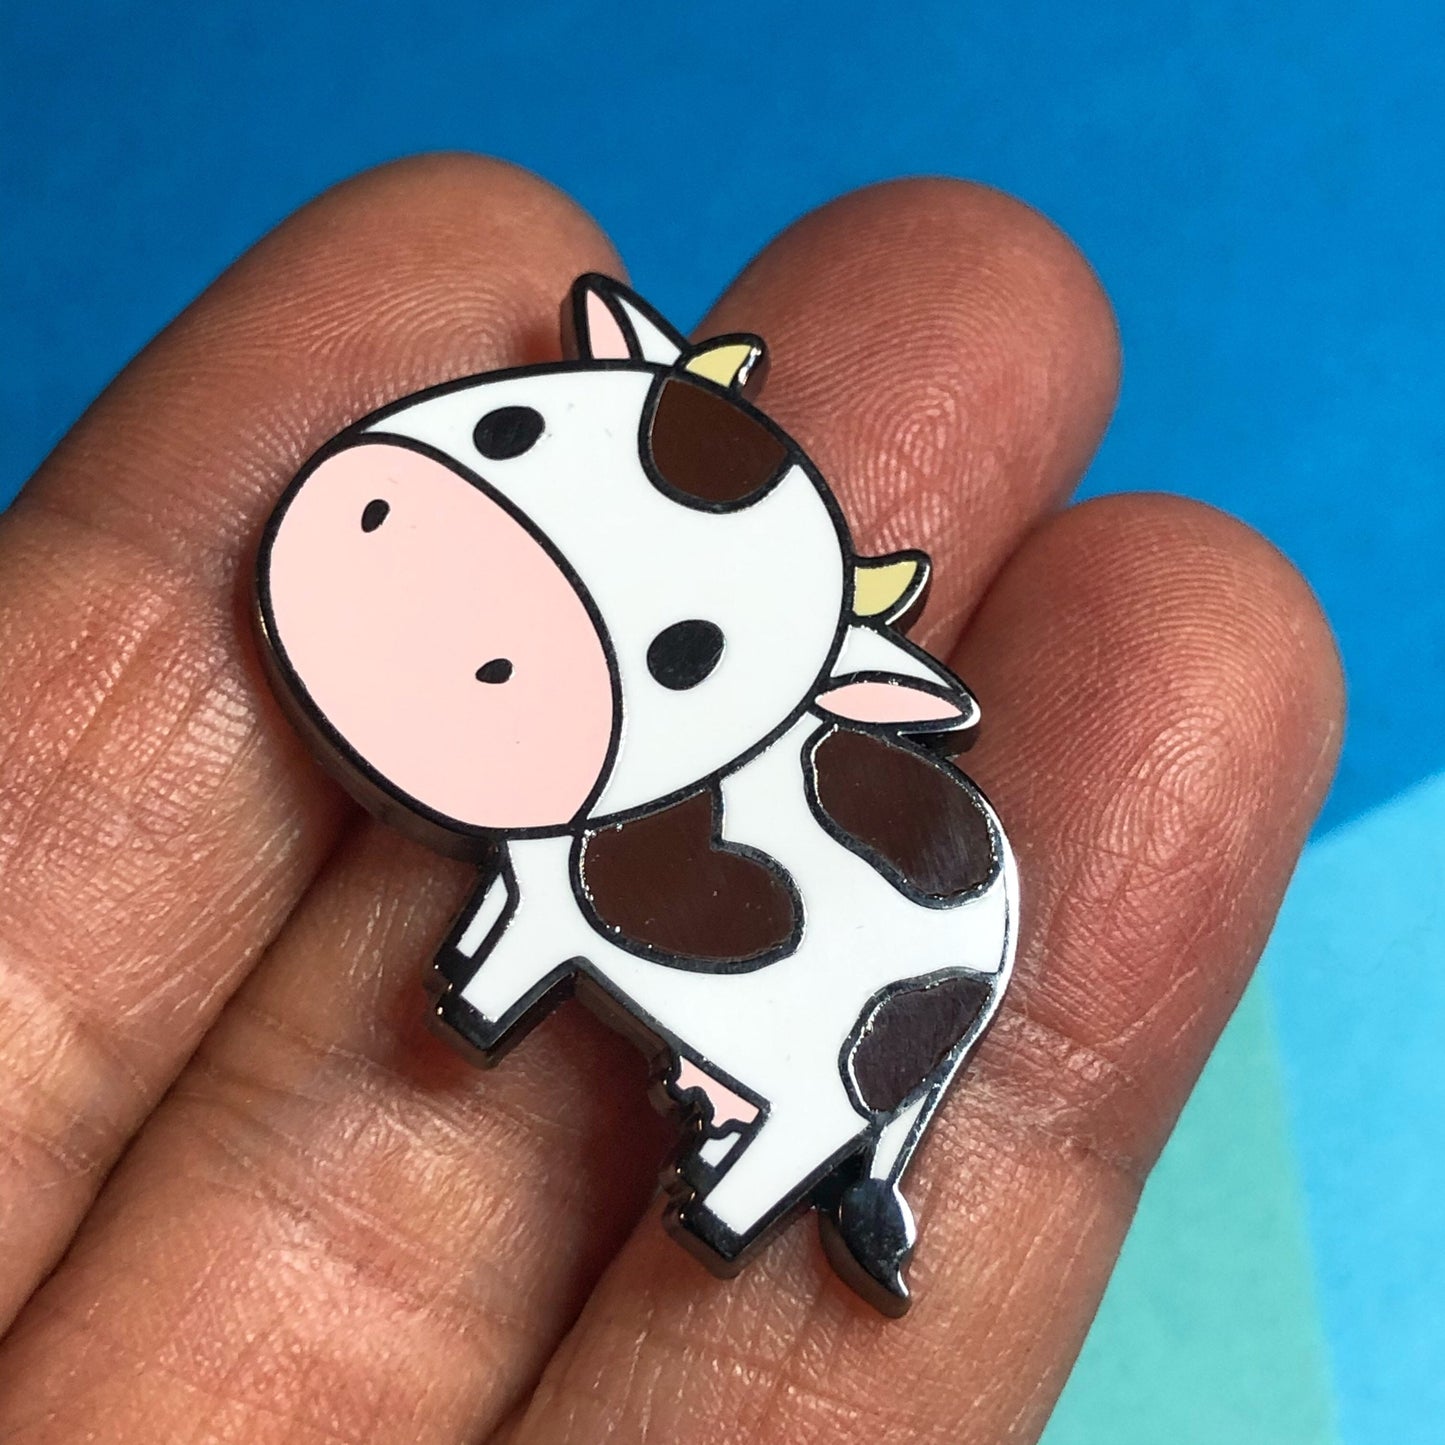 Brown and White Cow Hard Enamel Pin - cow pin, cute cow pin, cow lapel pin, cartoon cow pin